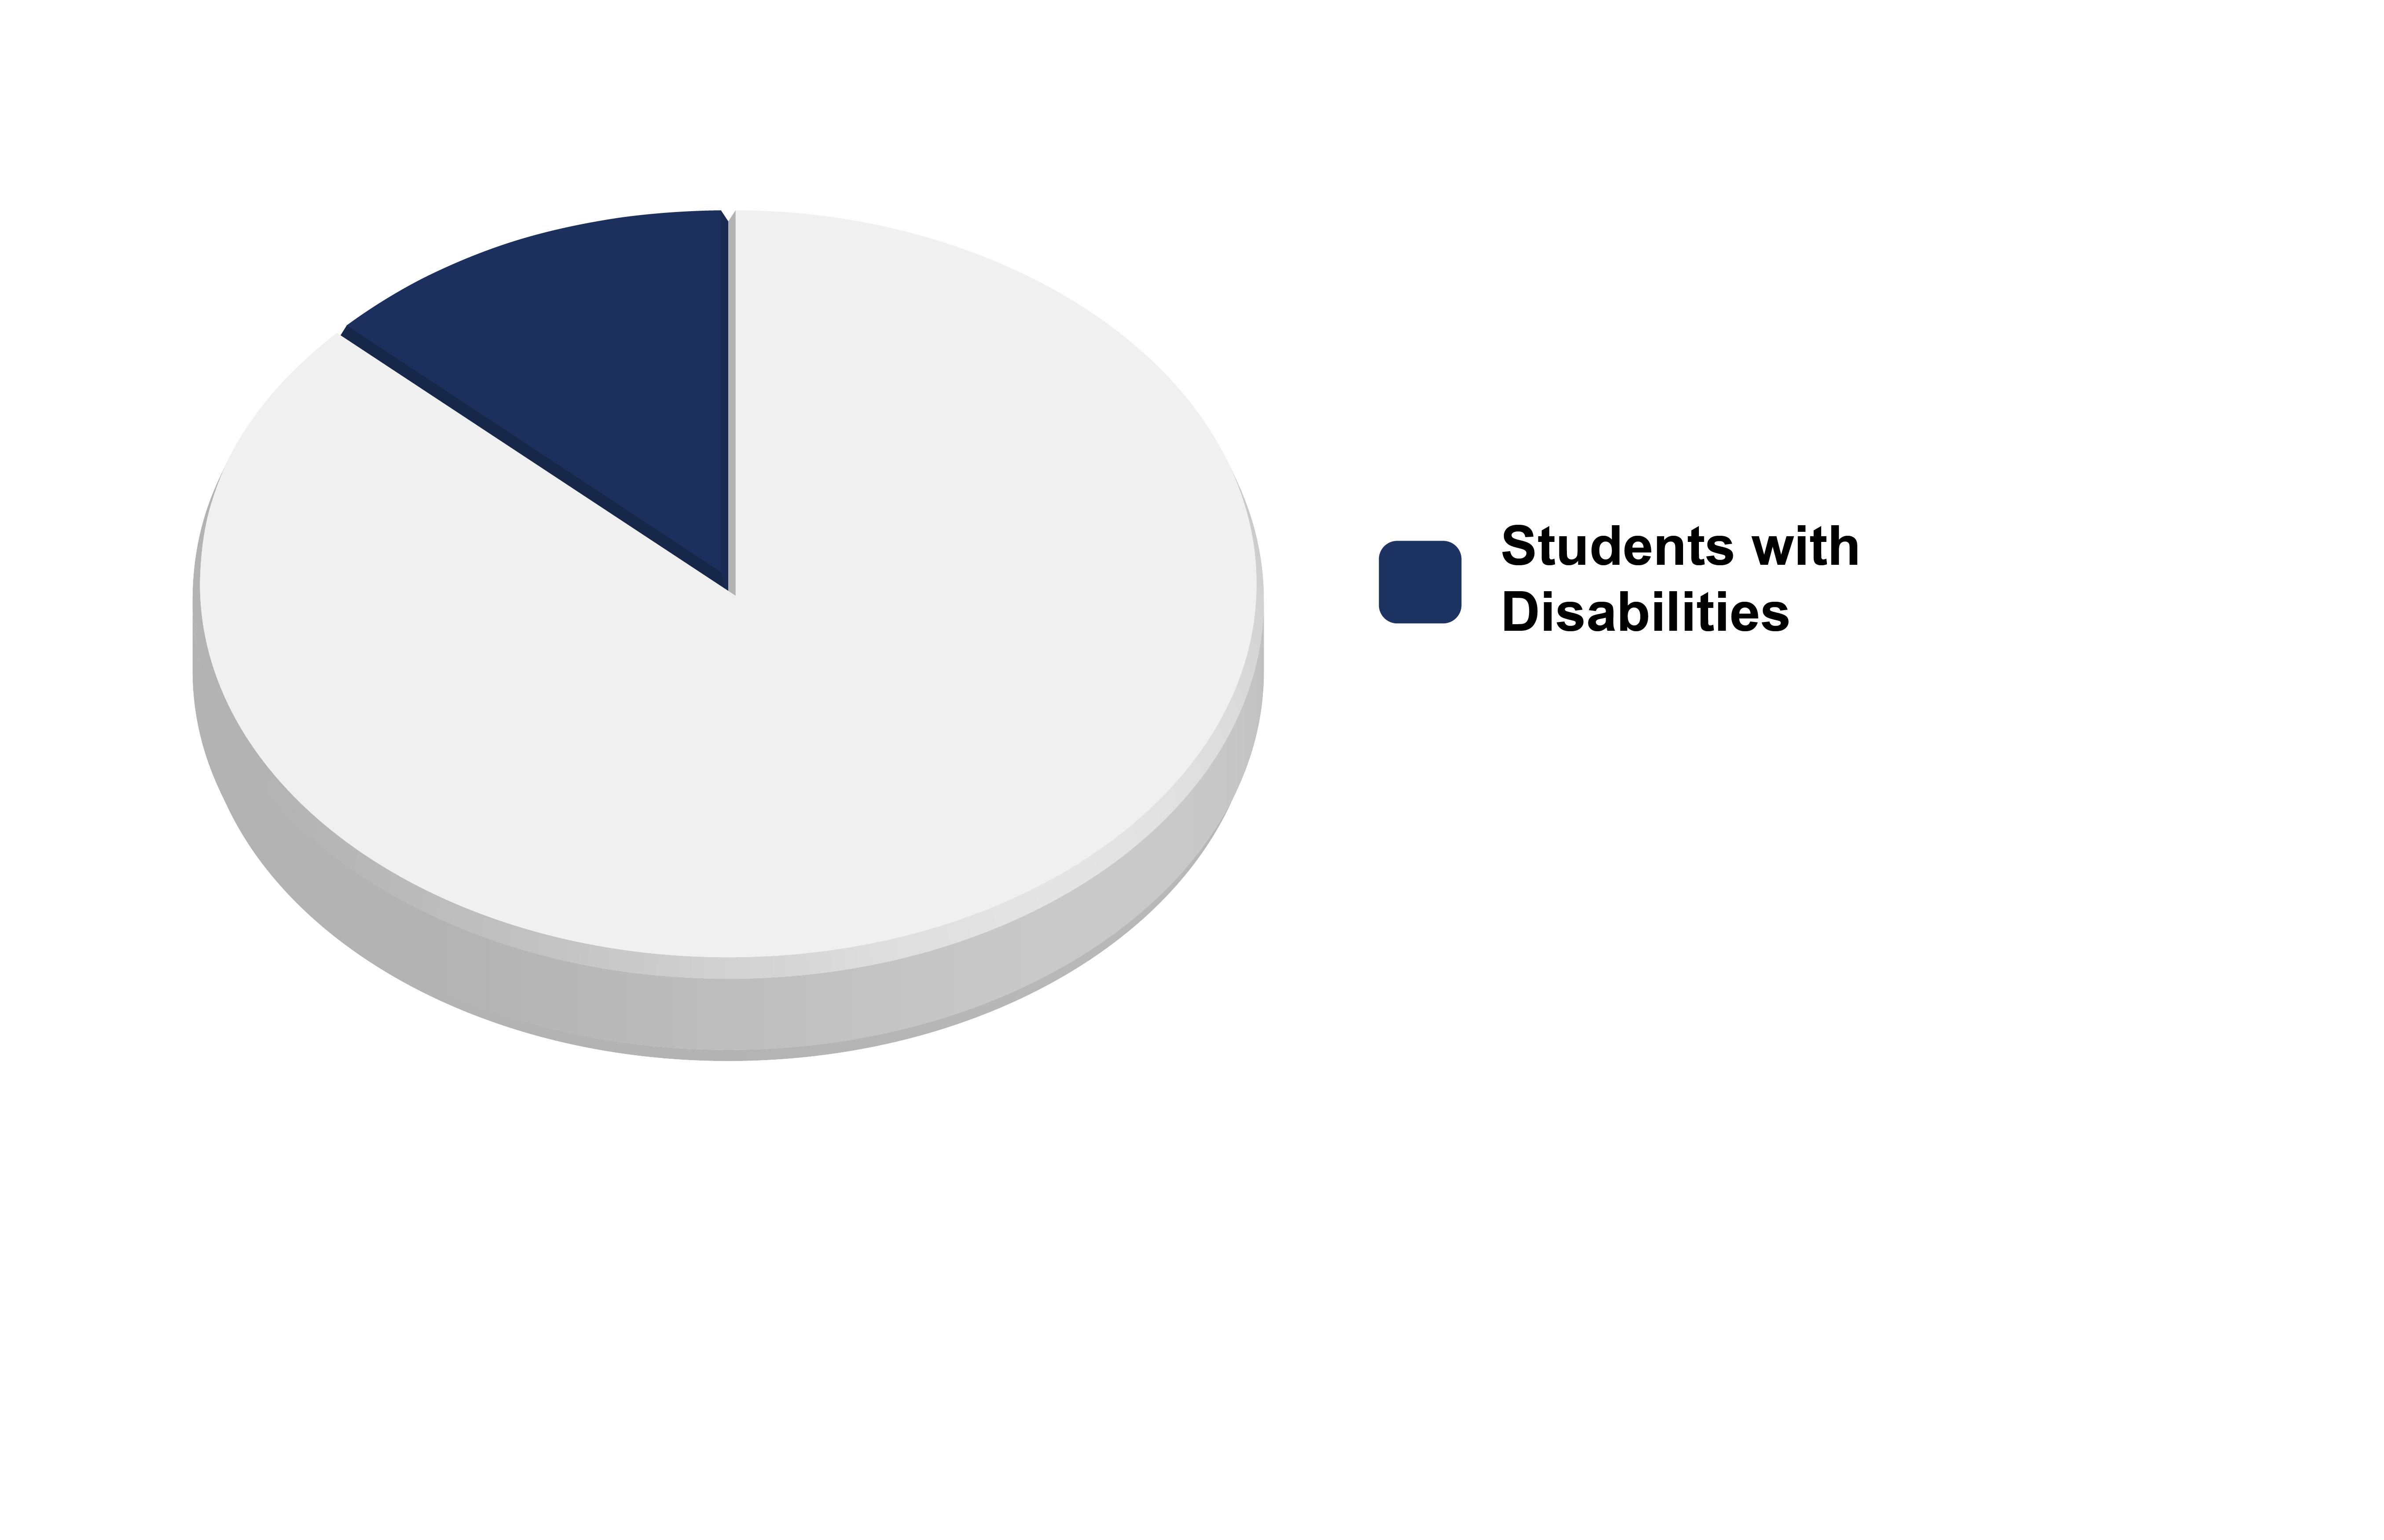 Pie chart showing the percentage of district students with disabilities